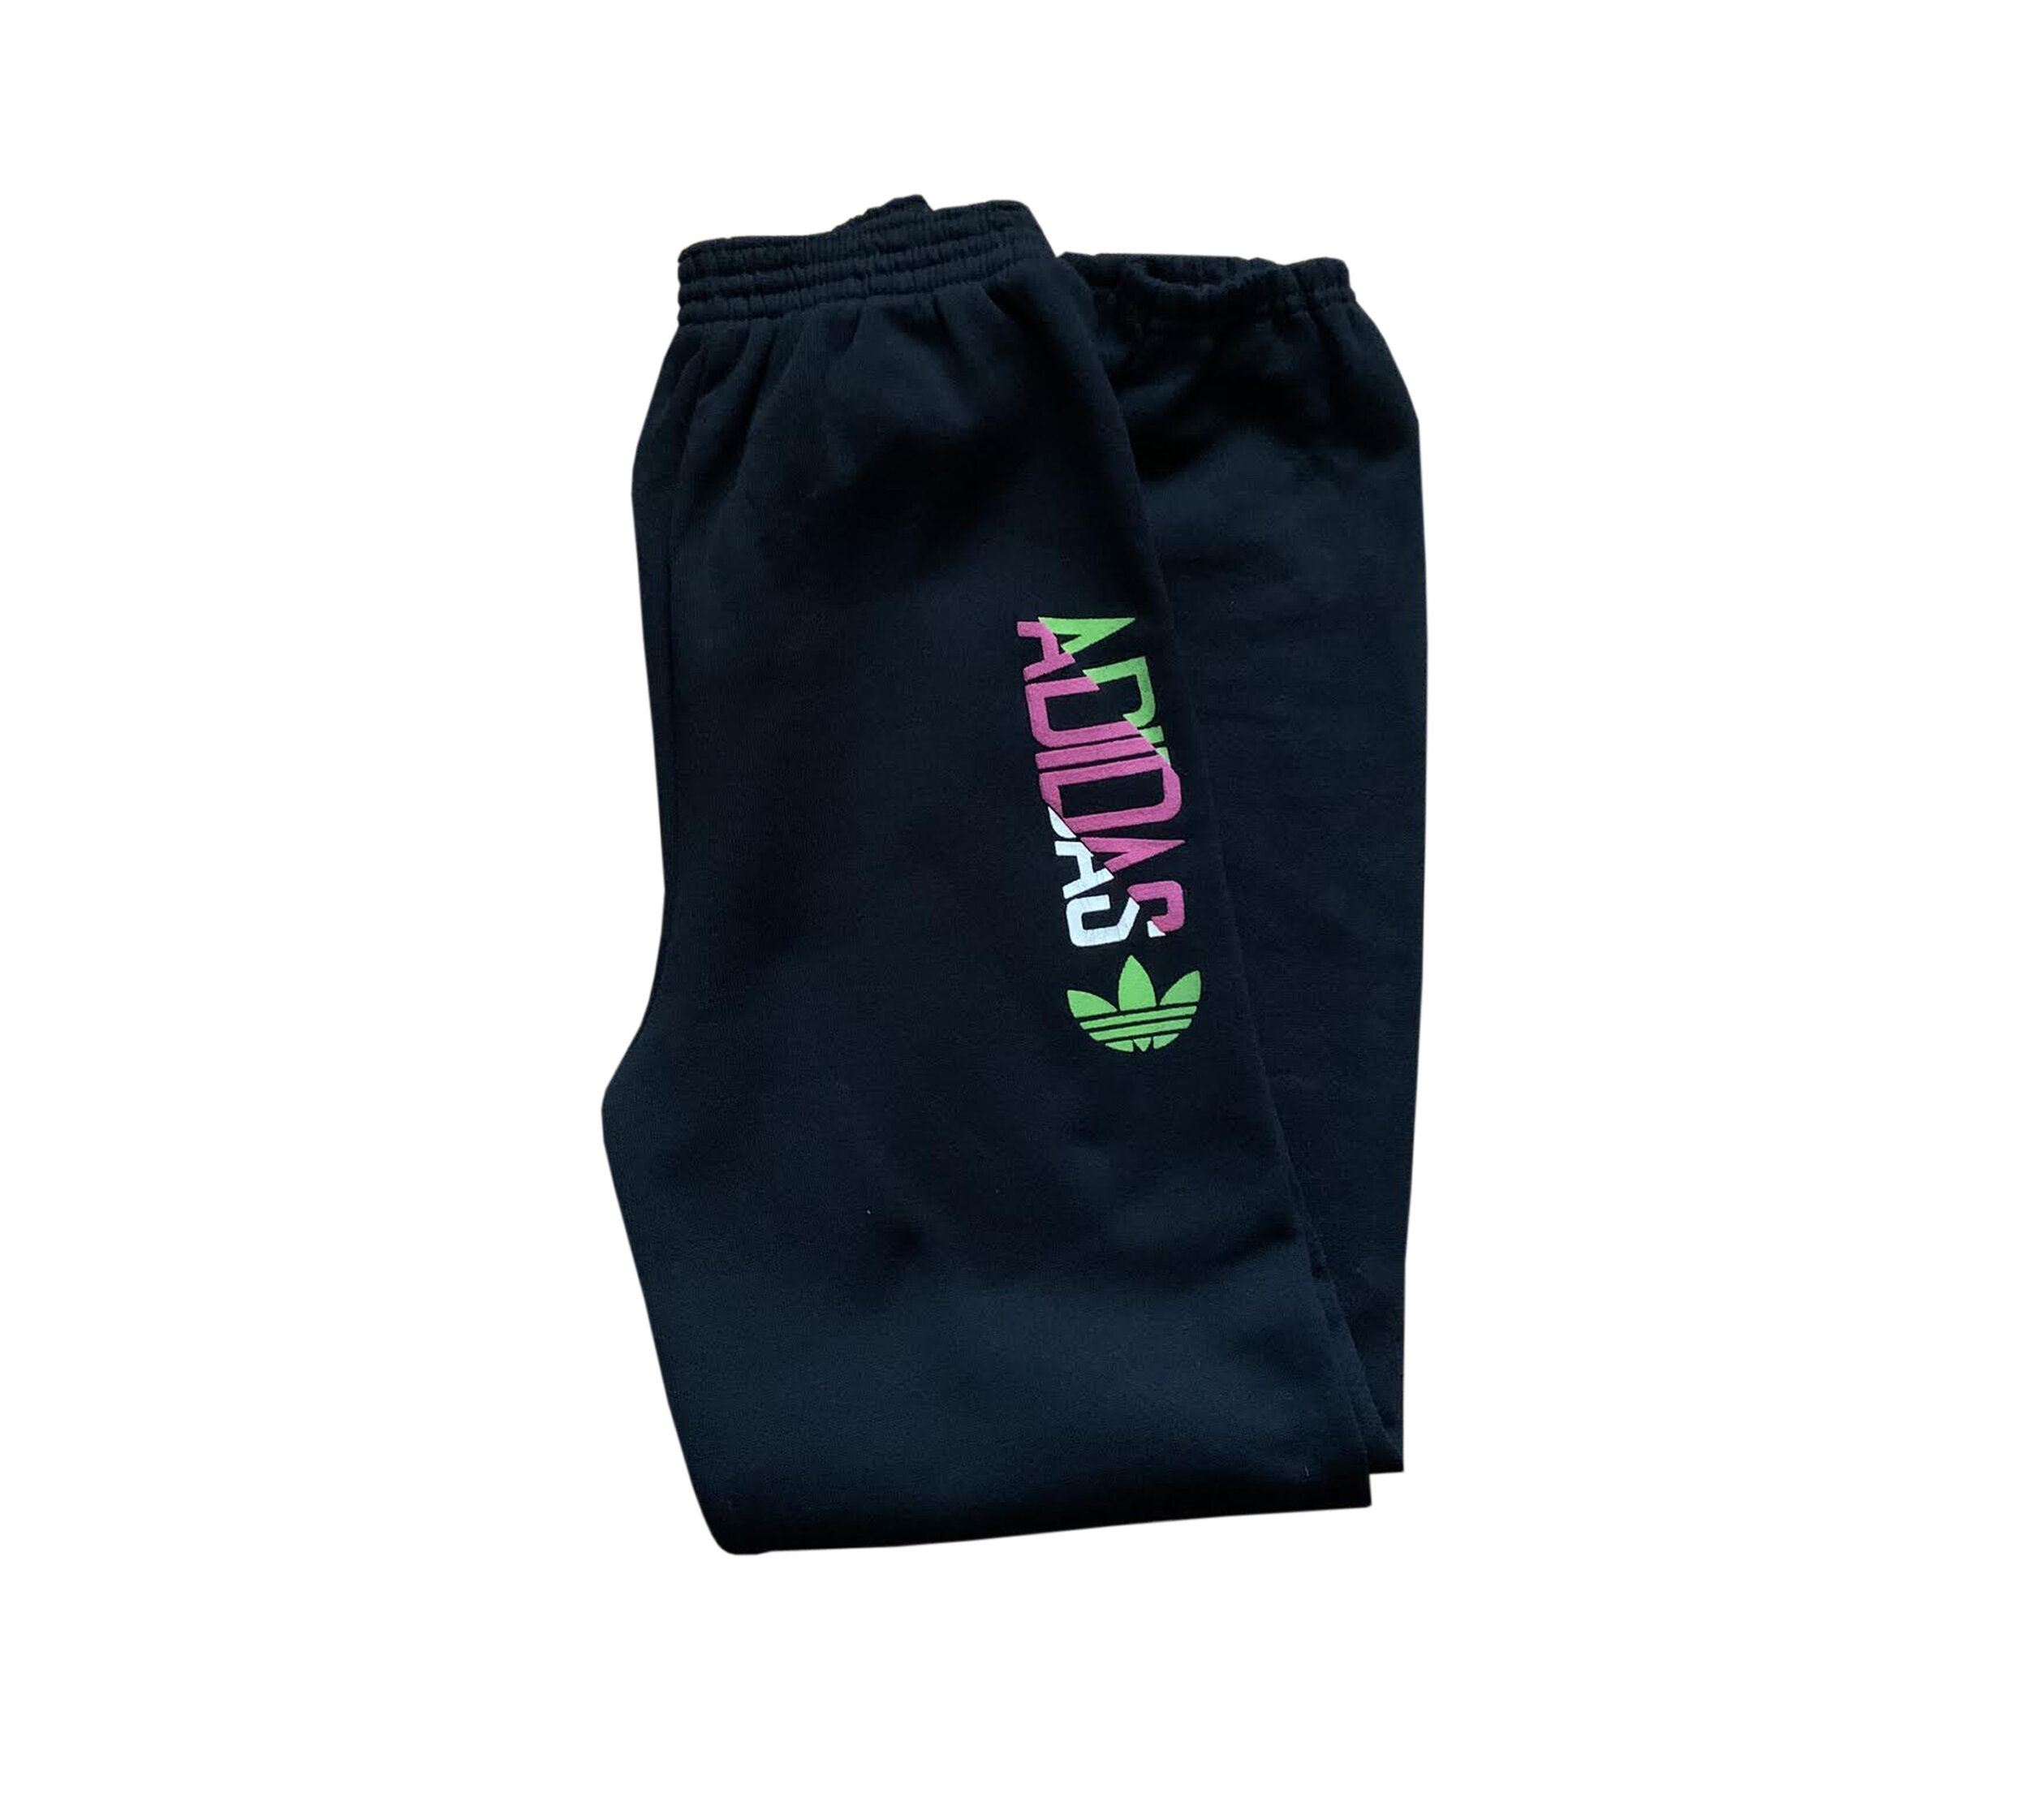 Kids Vintage Adidas Colorful Black Sweatpants (Size Youth L) NWT — Roots